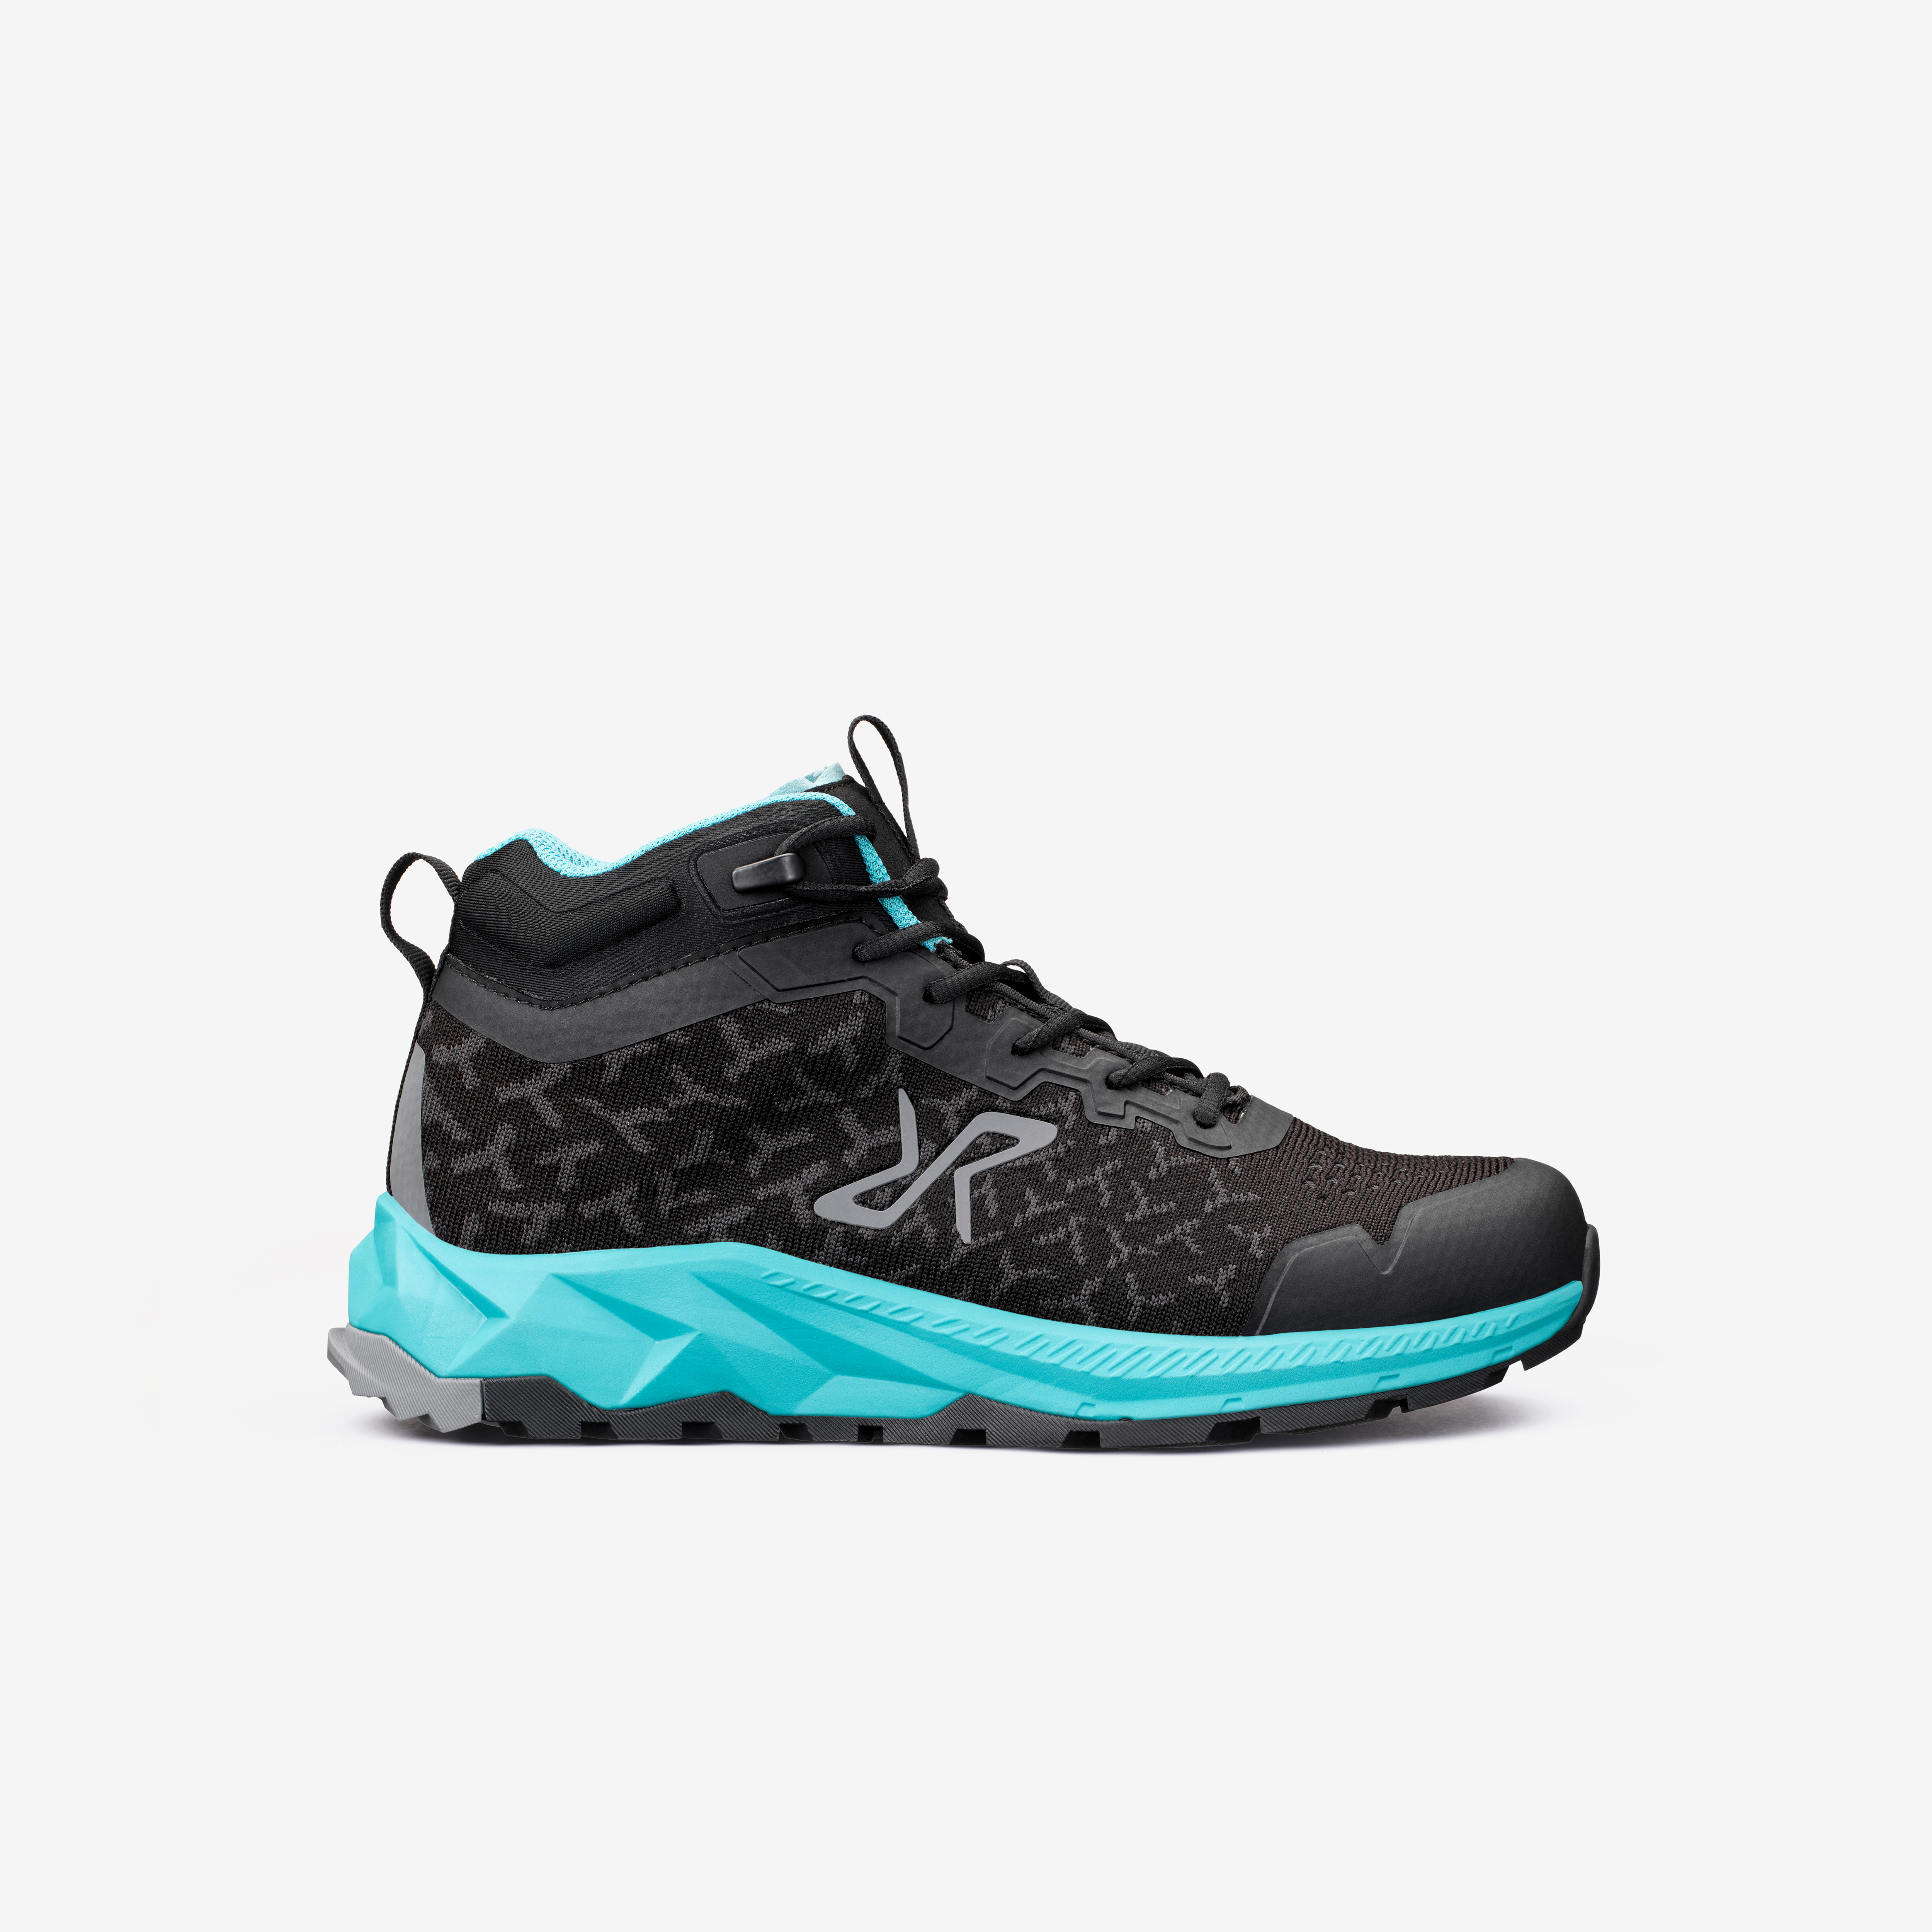 Trailknit Waterproof Mid Hiking Shoes Black/Turquoise Dames